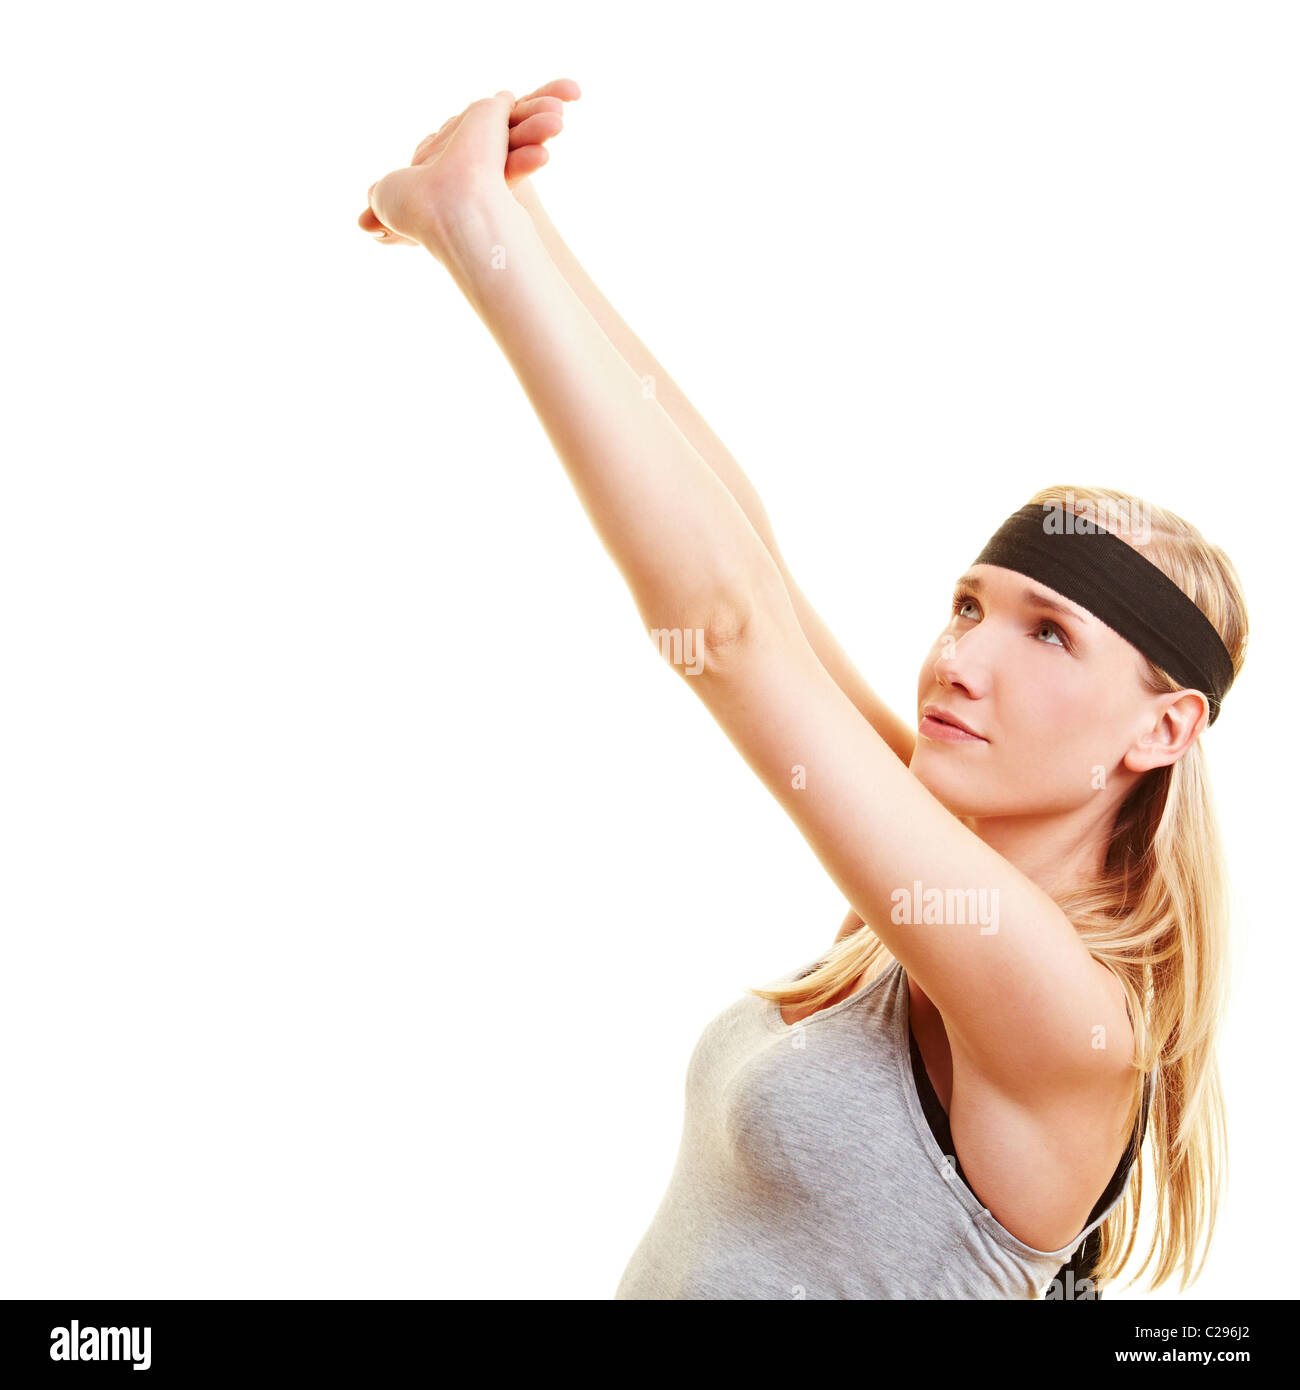 Woman stretching her arms Stock Photo